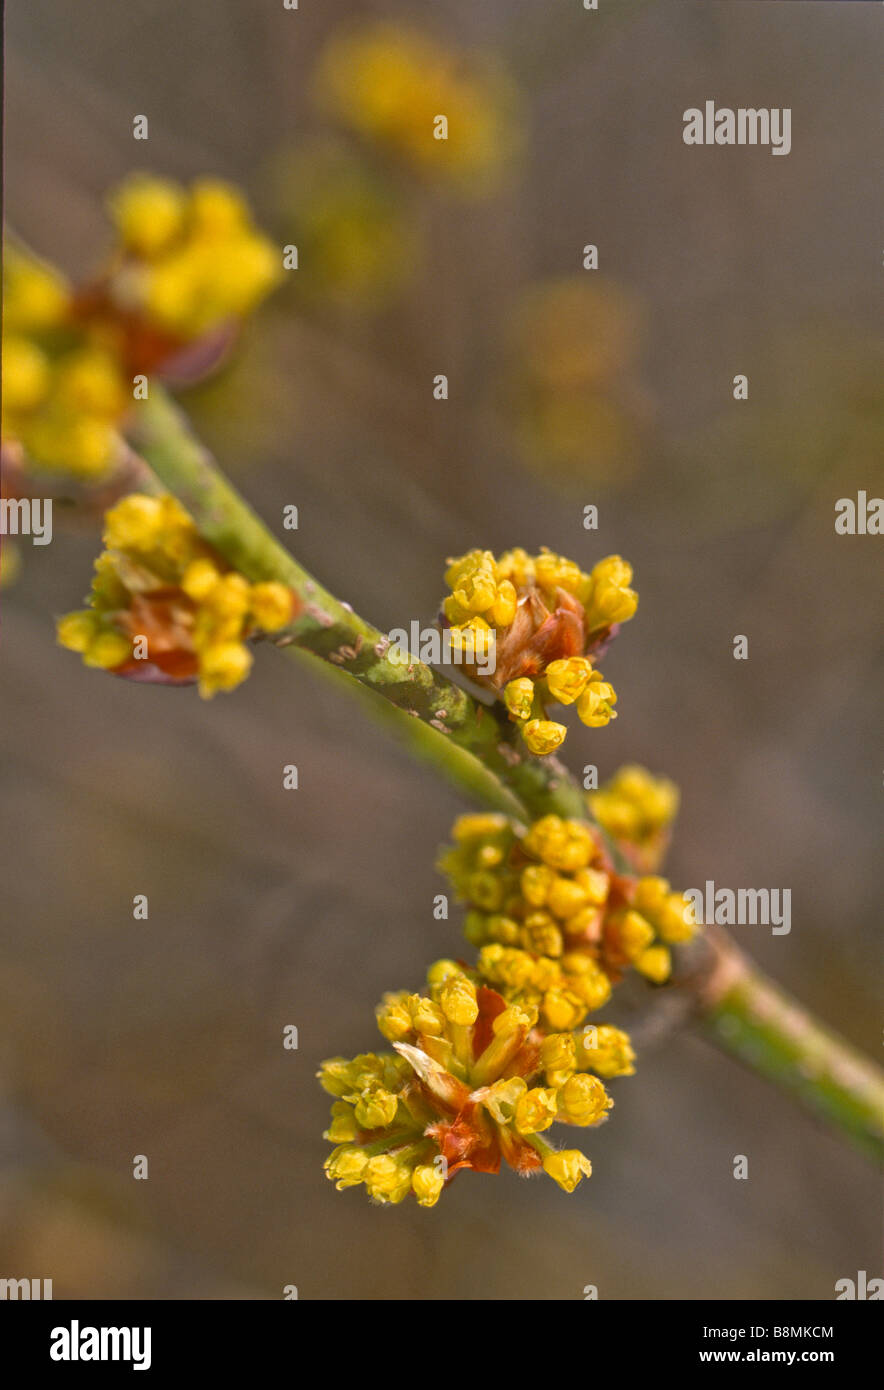 Close up of late winter or very early spring  flowers of Lindera obtusiloba (Japanese spicebush) Stock Photo